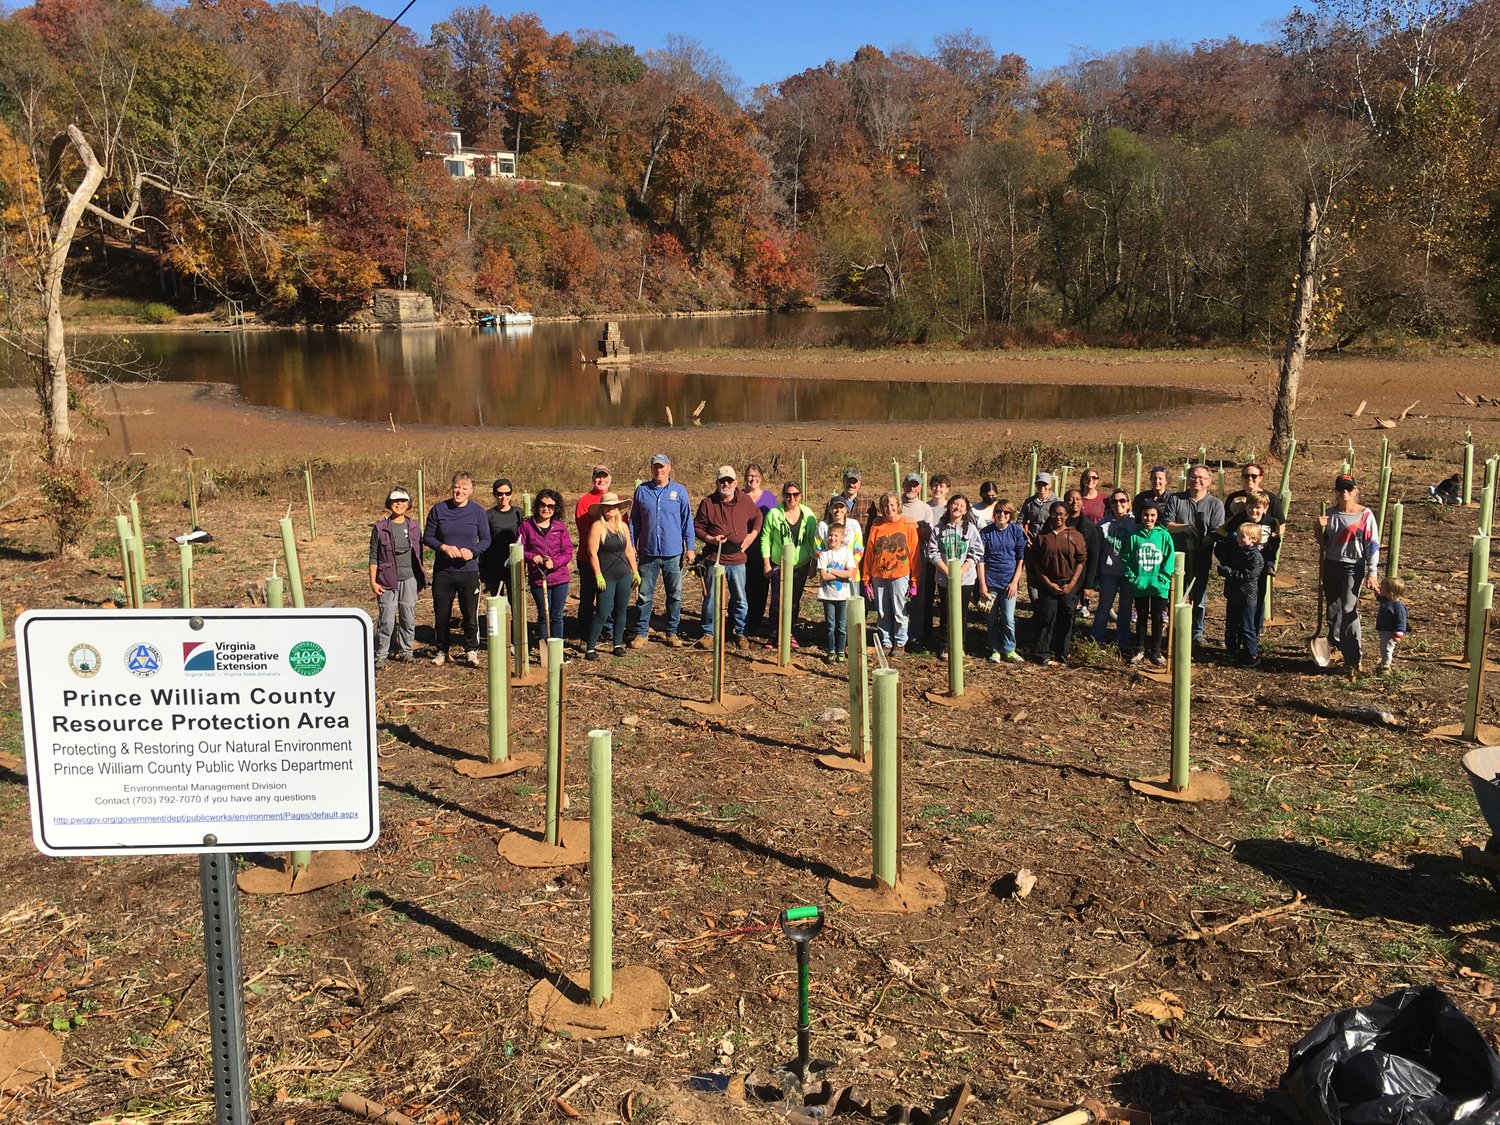 Volunteers gather to plant trees, flowers and other plants along the Occoquan.